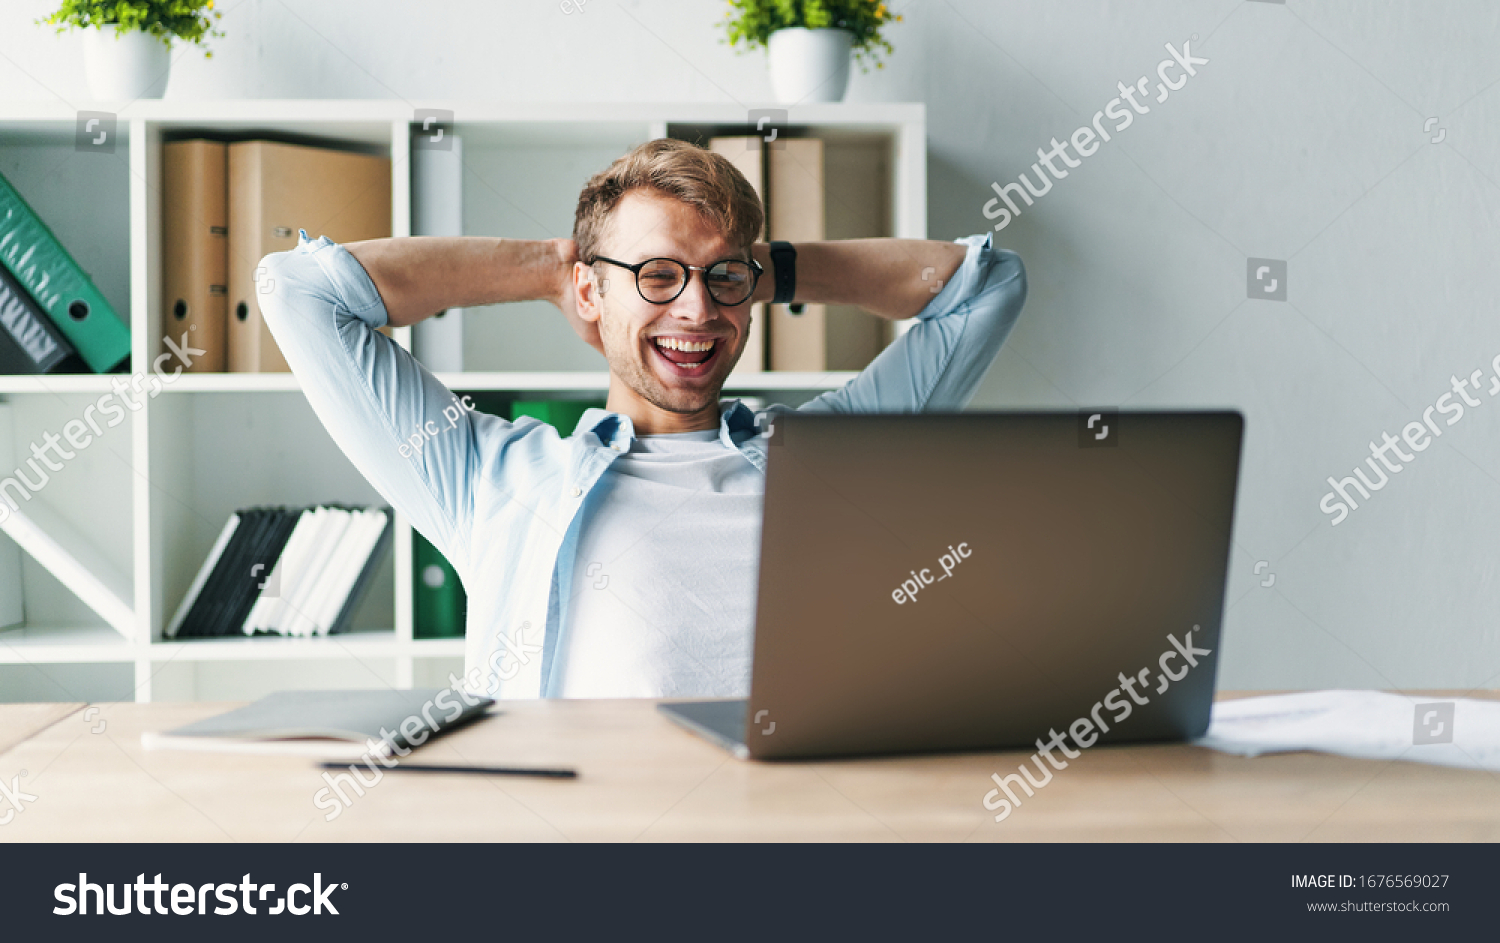 Young man smiling as he reads the screen of a laptop computer while relaxing working on a comfortable place by the wooden table at home. Happy Social distancing #1676569027